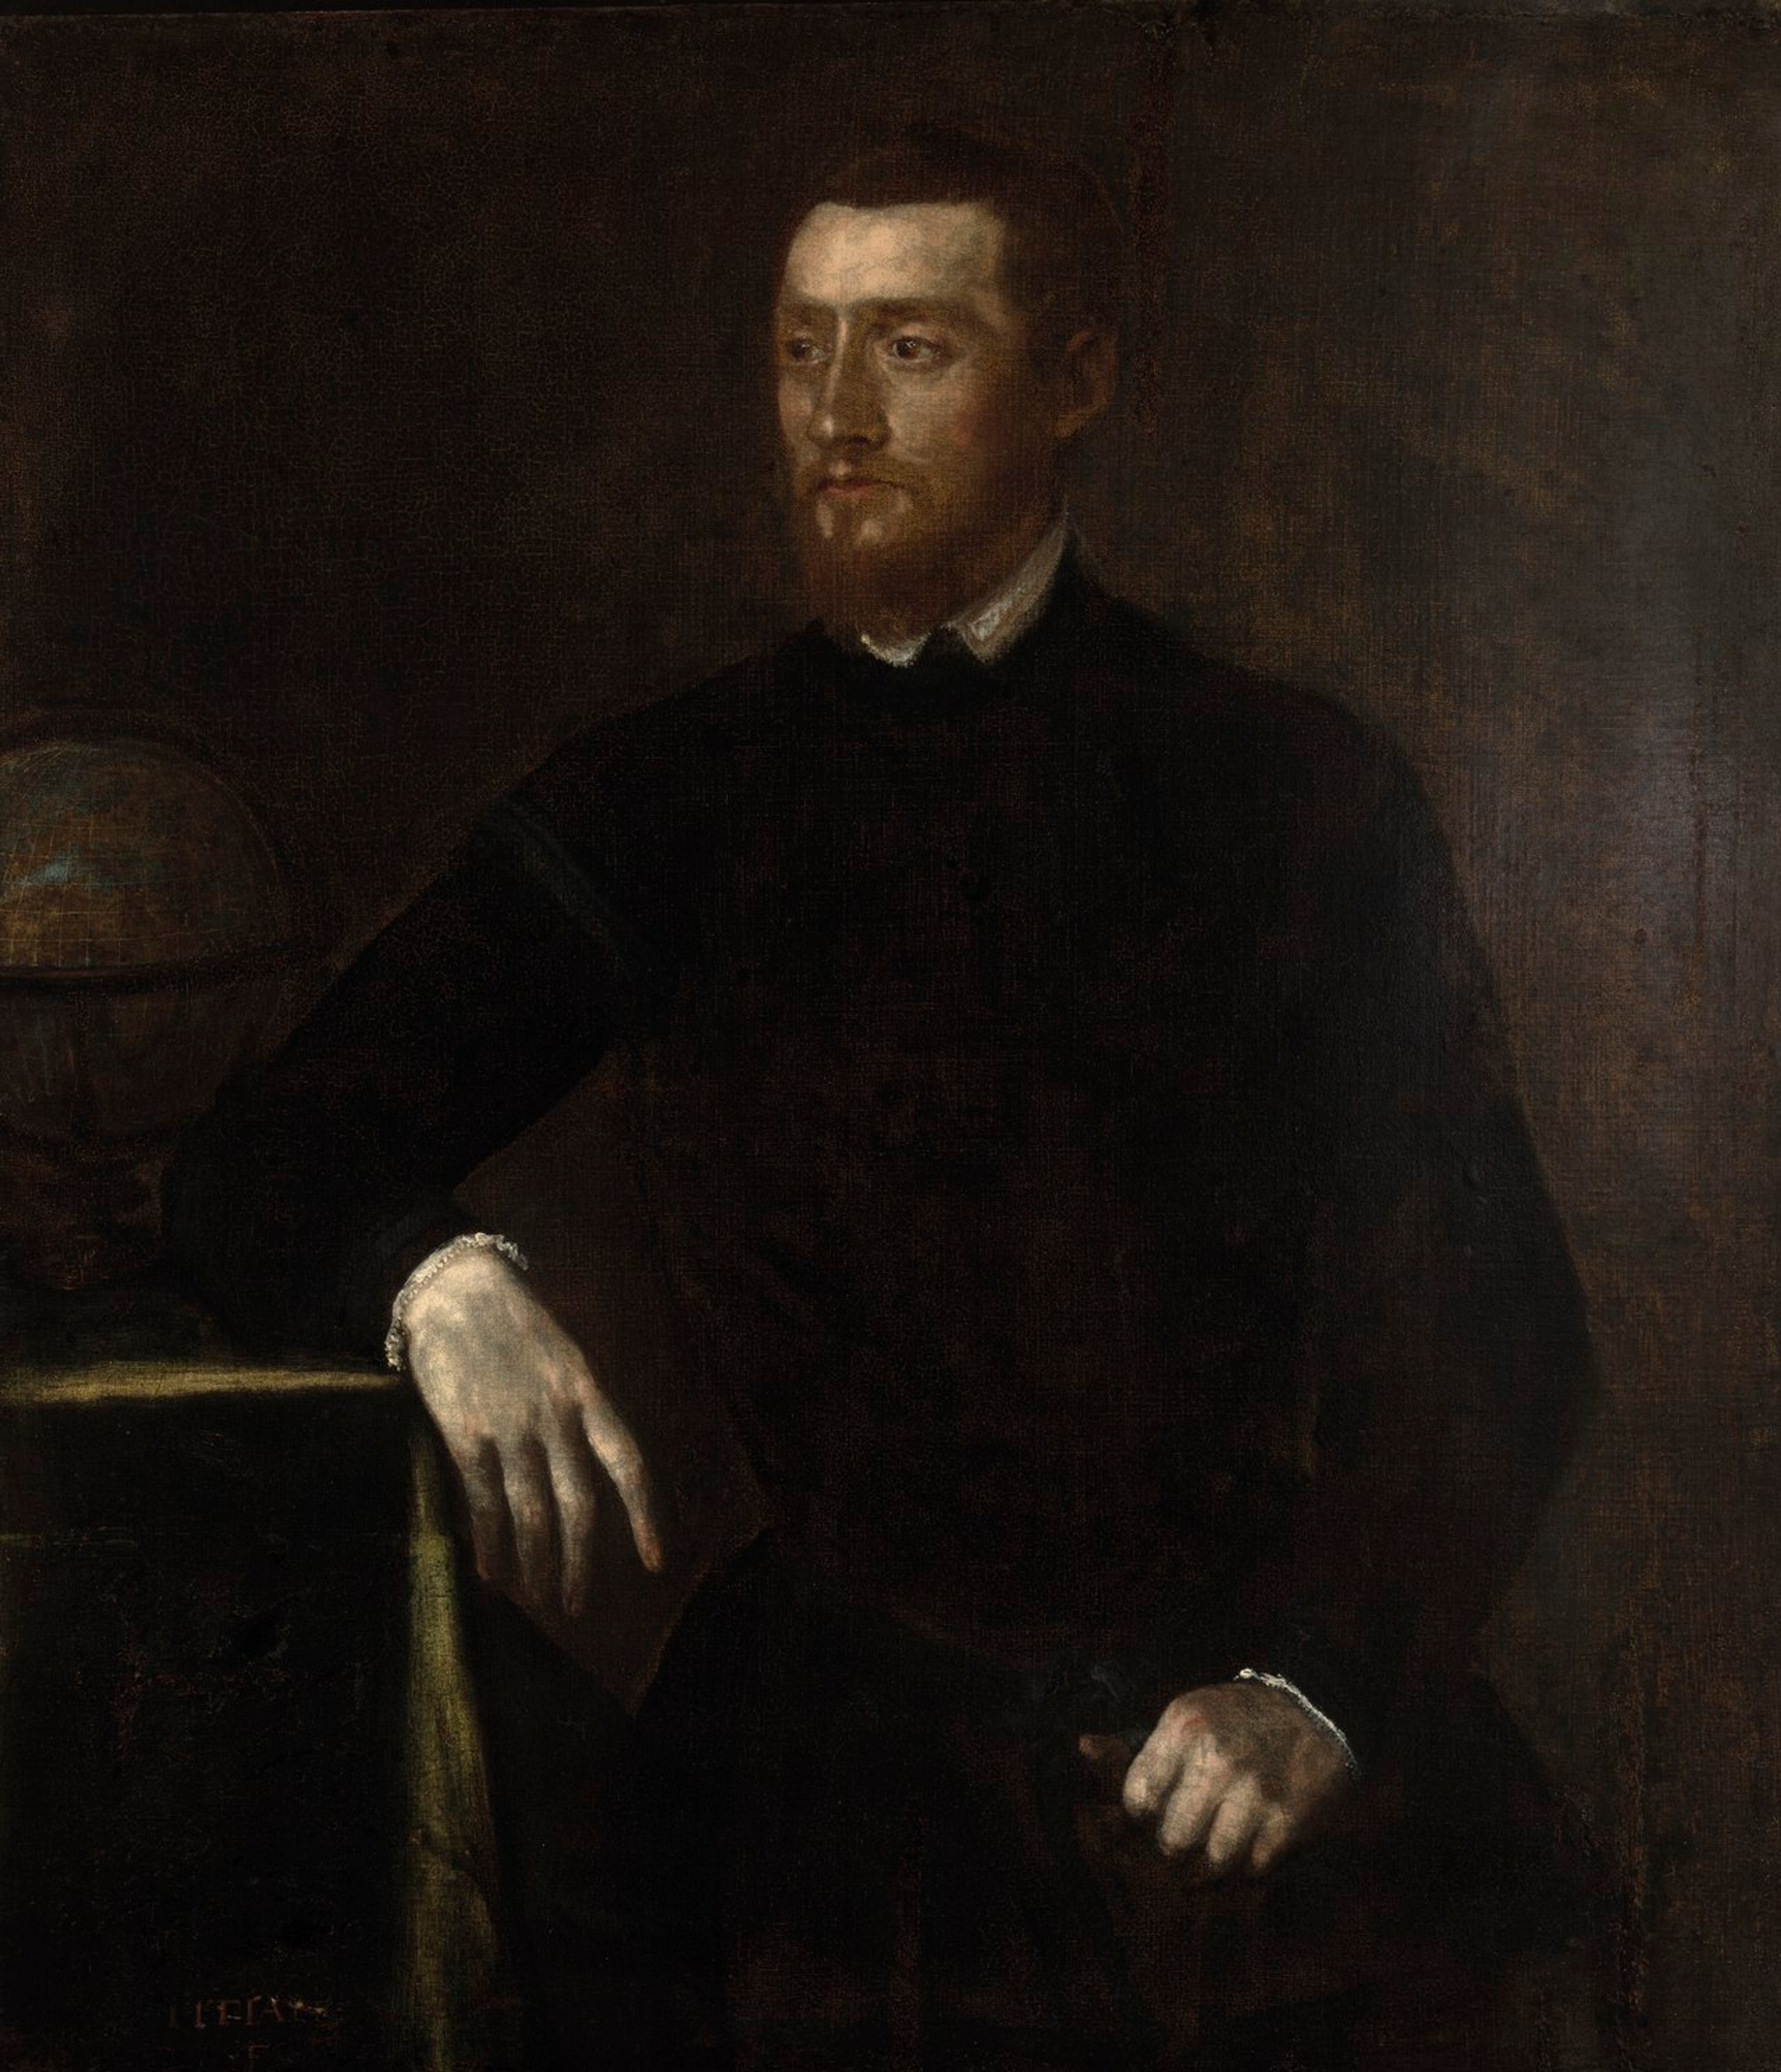 Colour portrait of Gerard Mercator, who's sat down with his right arm resting against a table with a globe in the background.